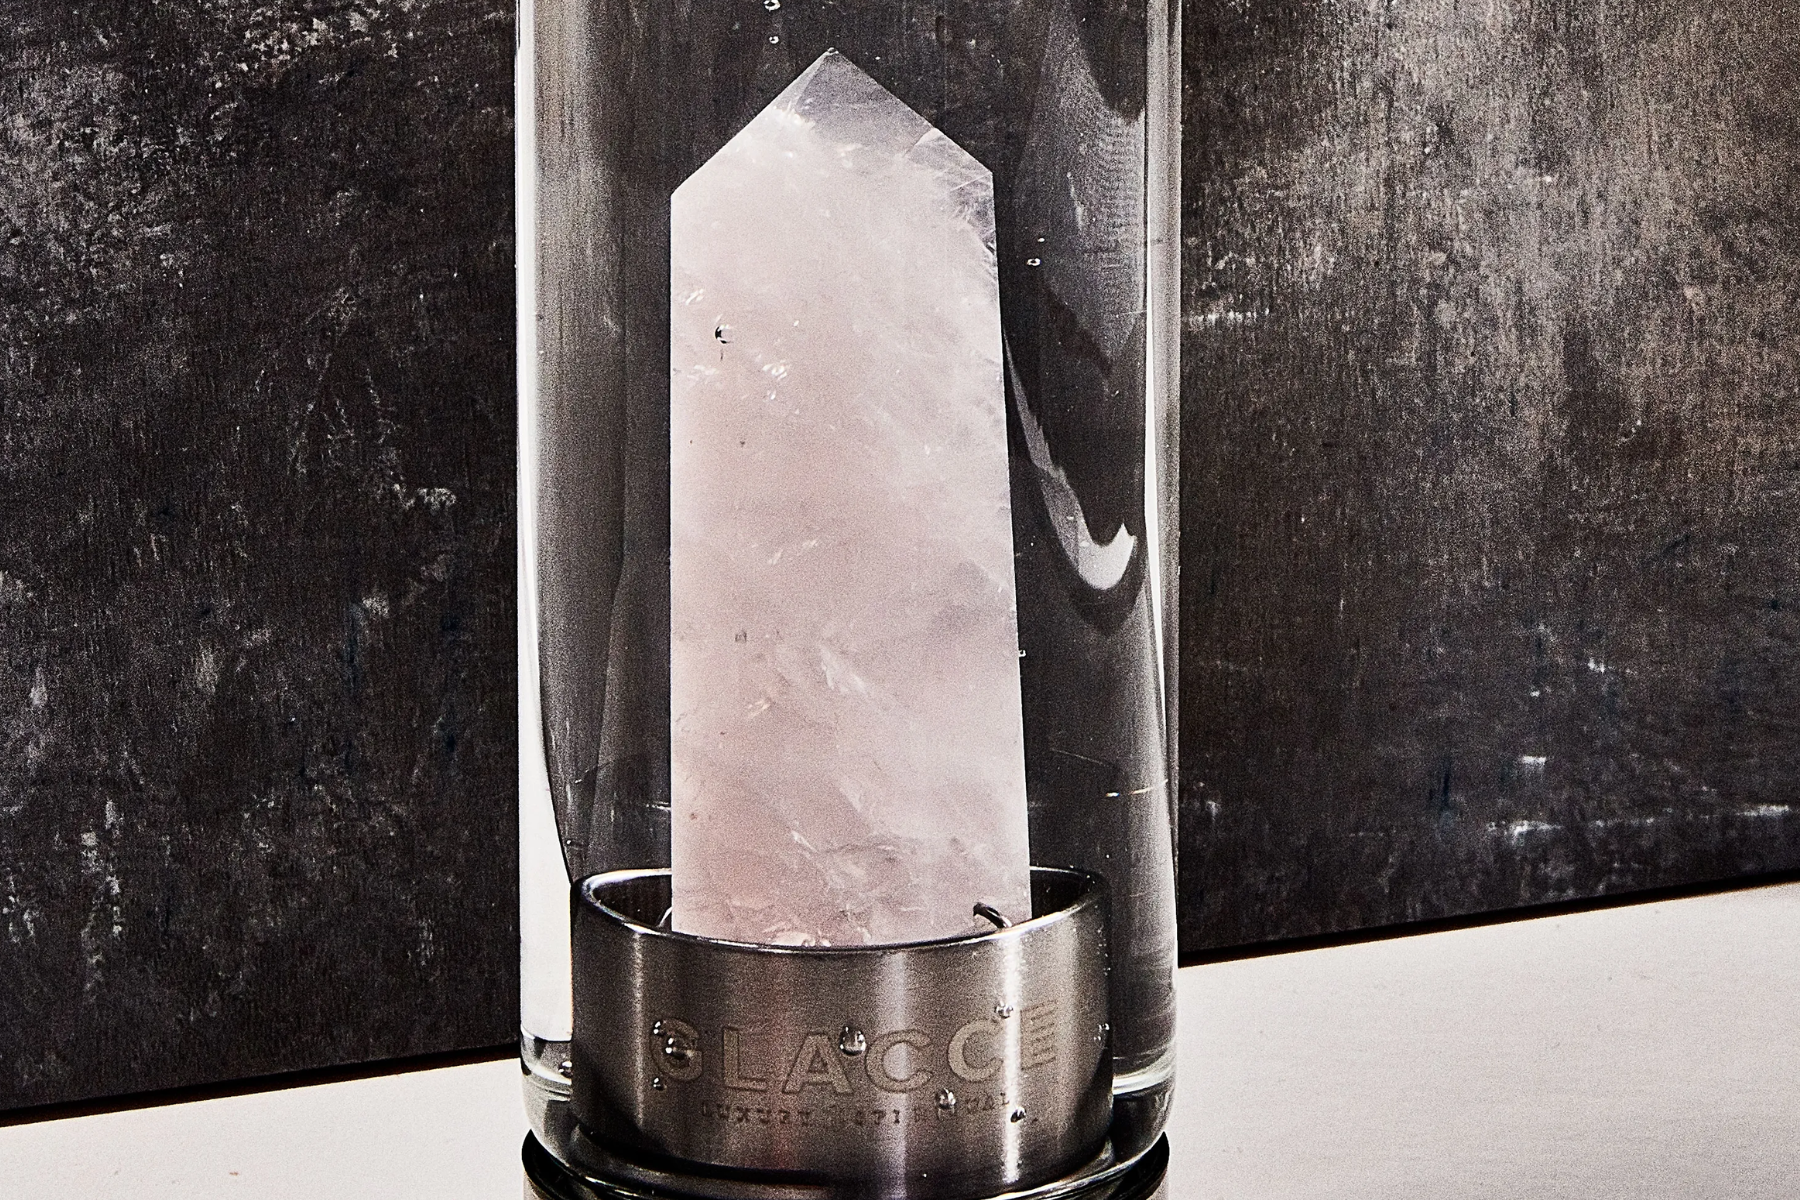 A pure quartz crystal in a glass container